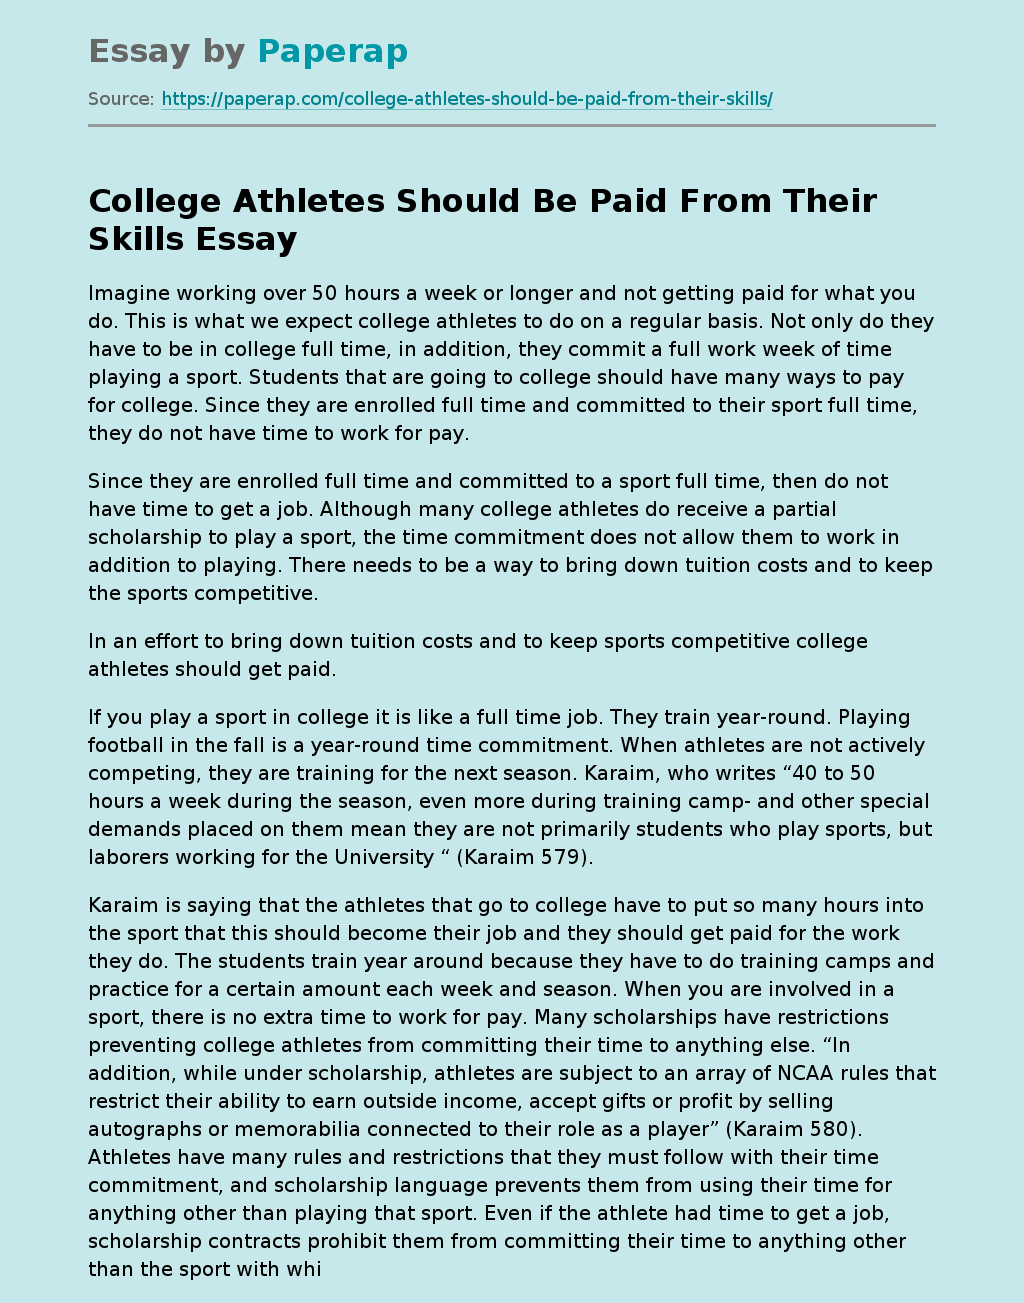 College Athletes Should Be Paid From Their Skills